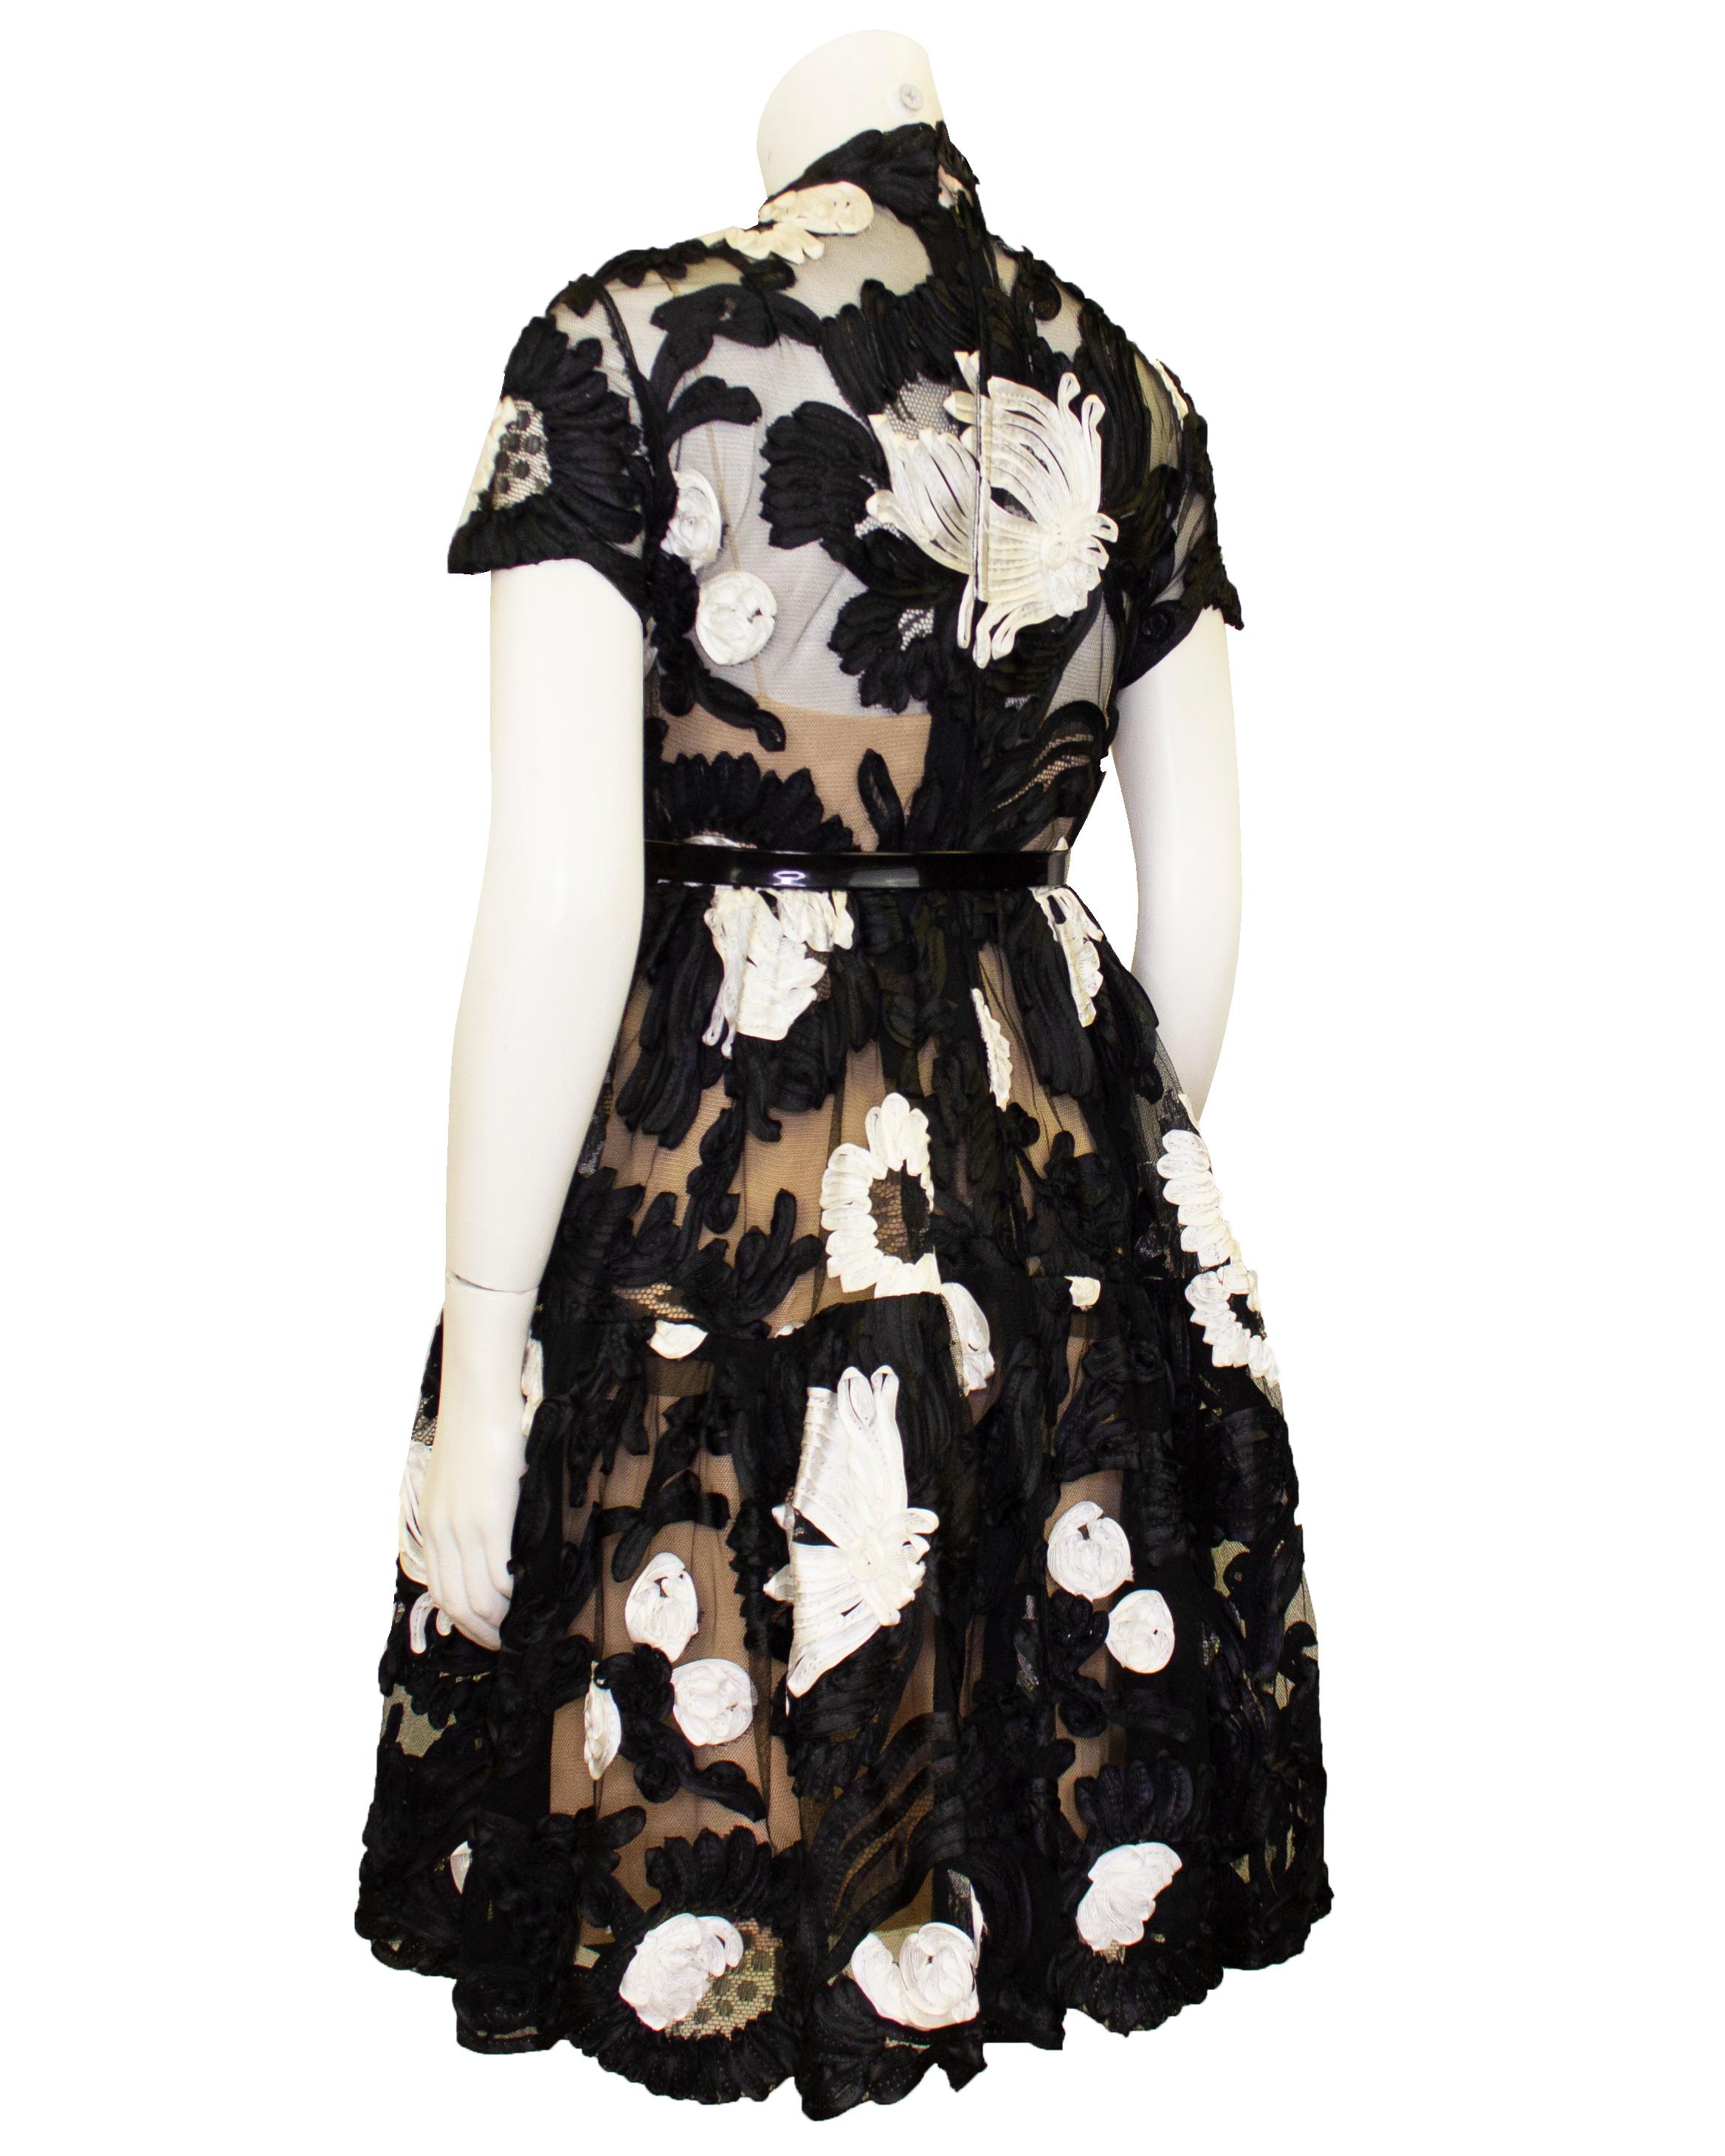 Early Bill Blass Black & White Guipure Lace and Ribbon Dress In Excellent Condition For Sale In Toronto, Ontario